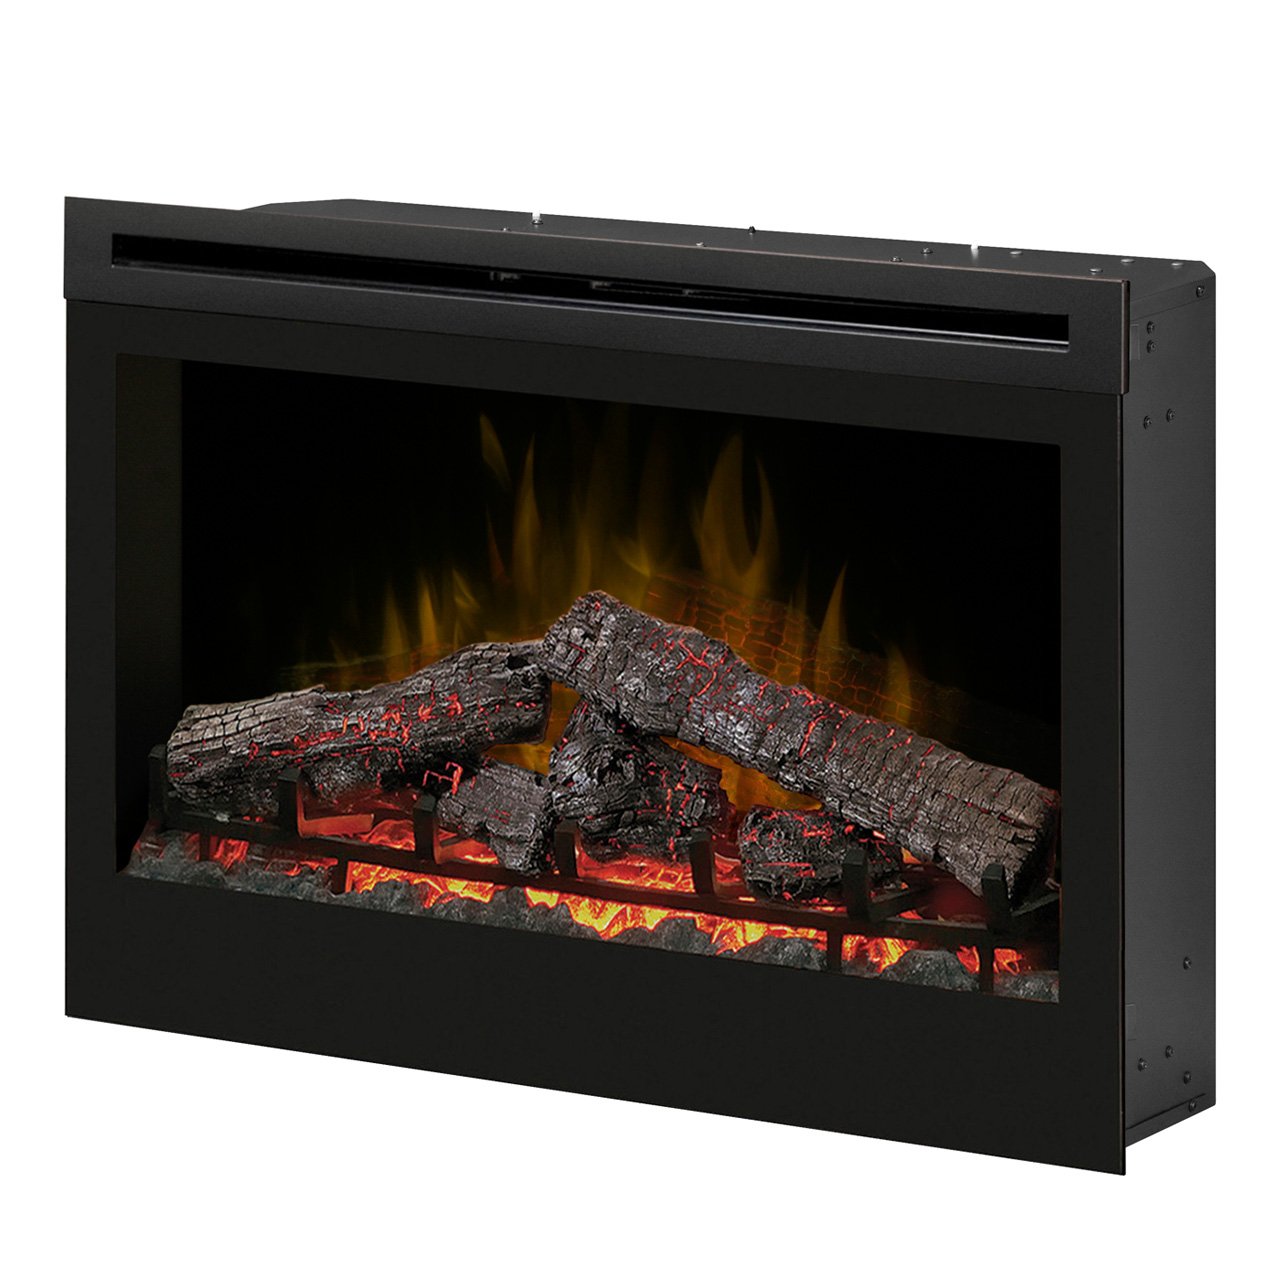 Fireplace Fuel Beautiful Dimplex Df3033st 33 Inch Self Trimming Electric Fireplace Insert